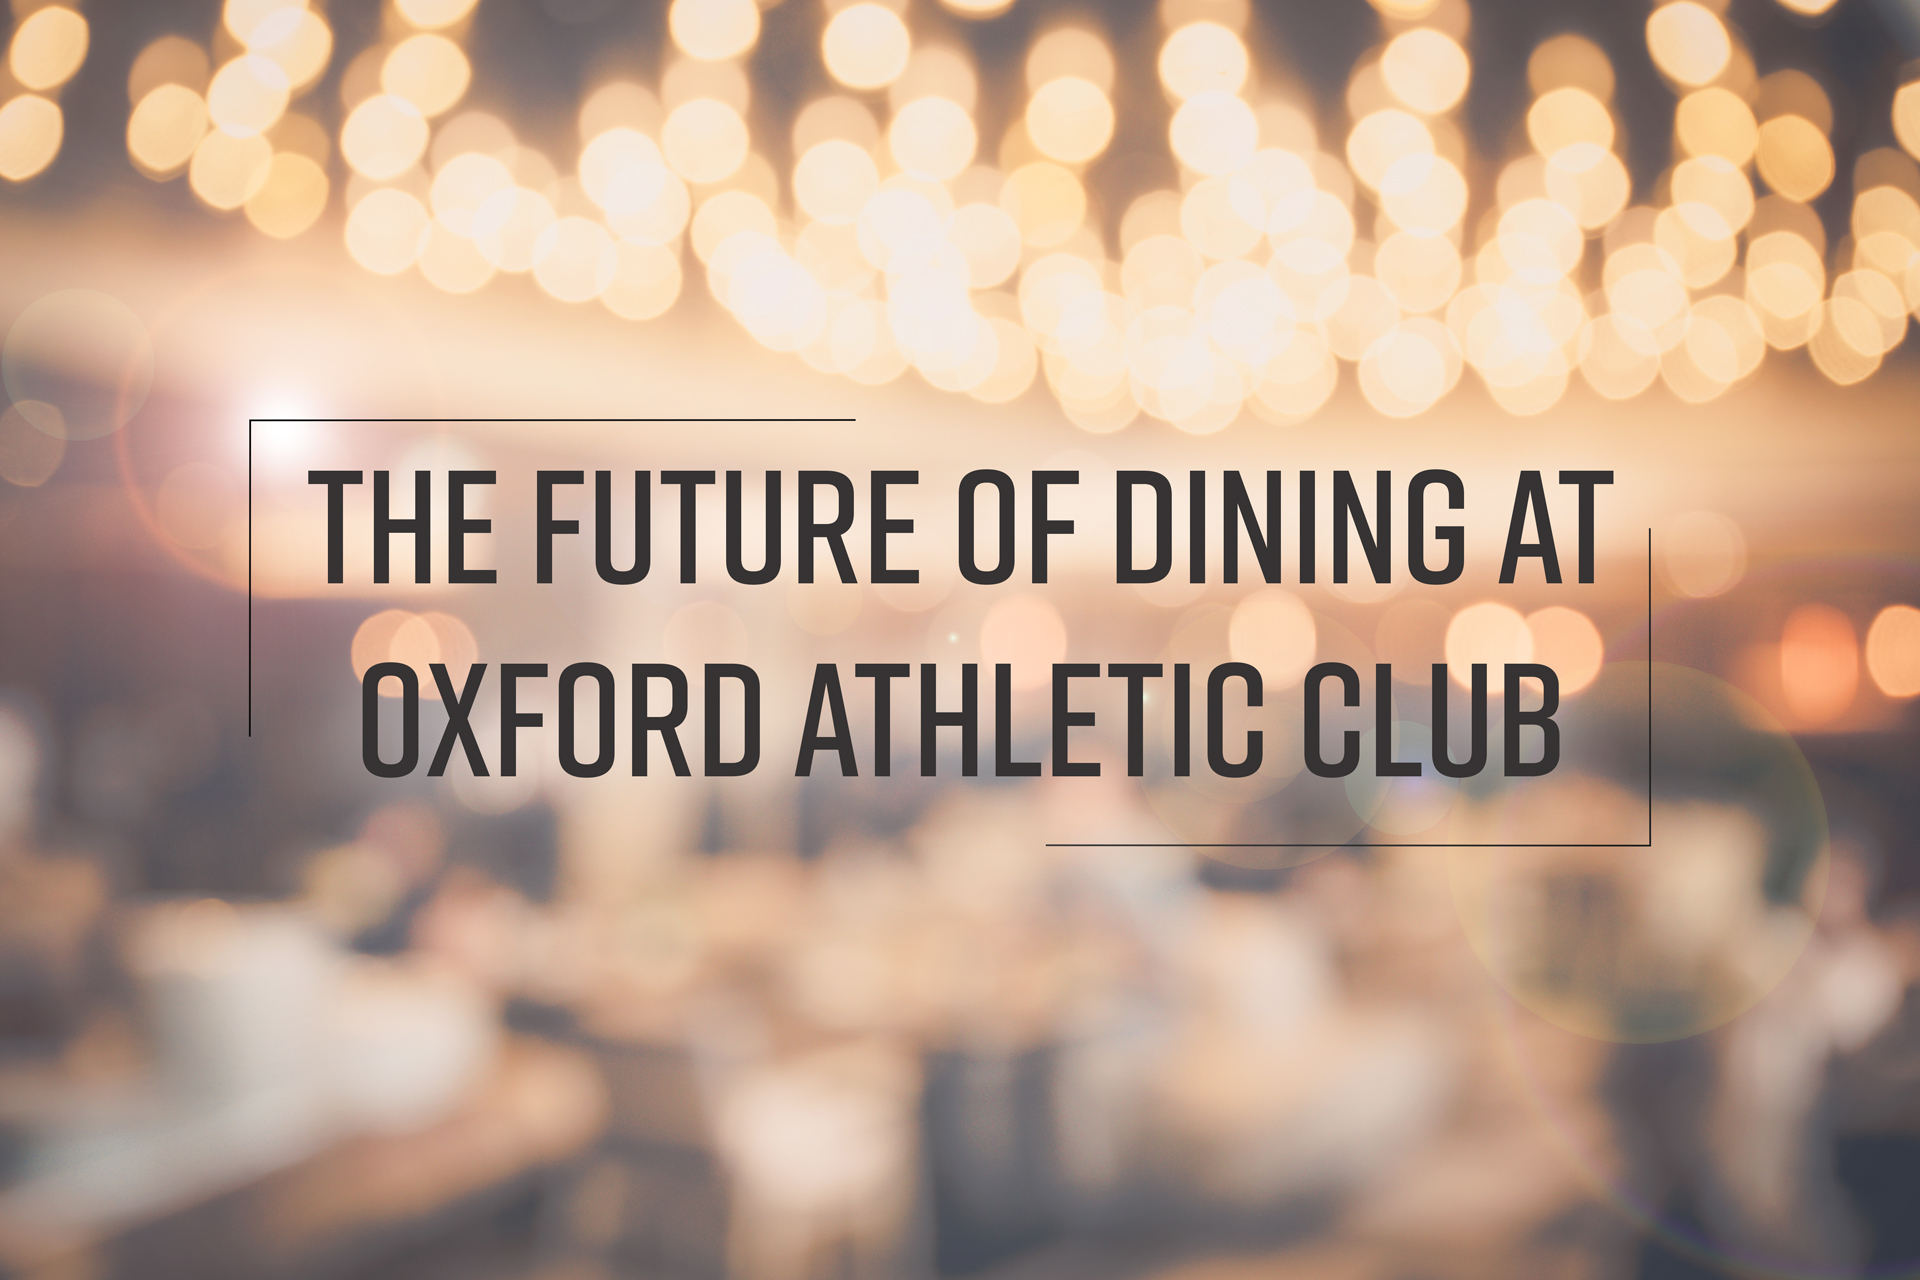 The Future of Dining at Oxford Athletic Club